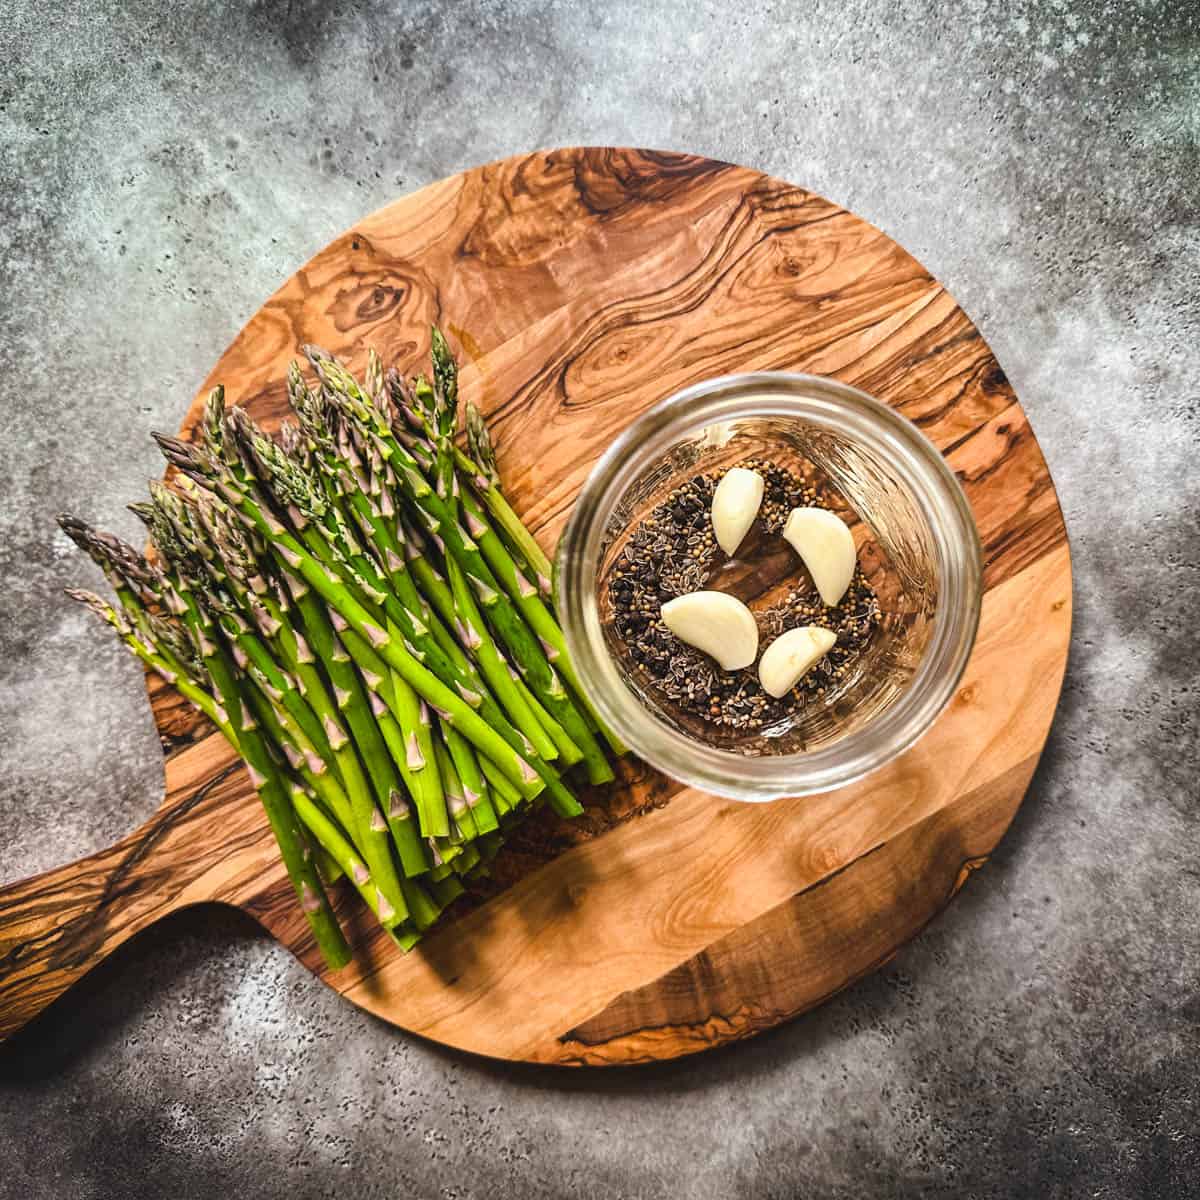 Asparagus trimmed next to a jar of pickling spices and garlic on a round wood cutting board, top view. 